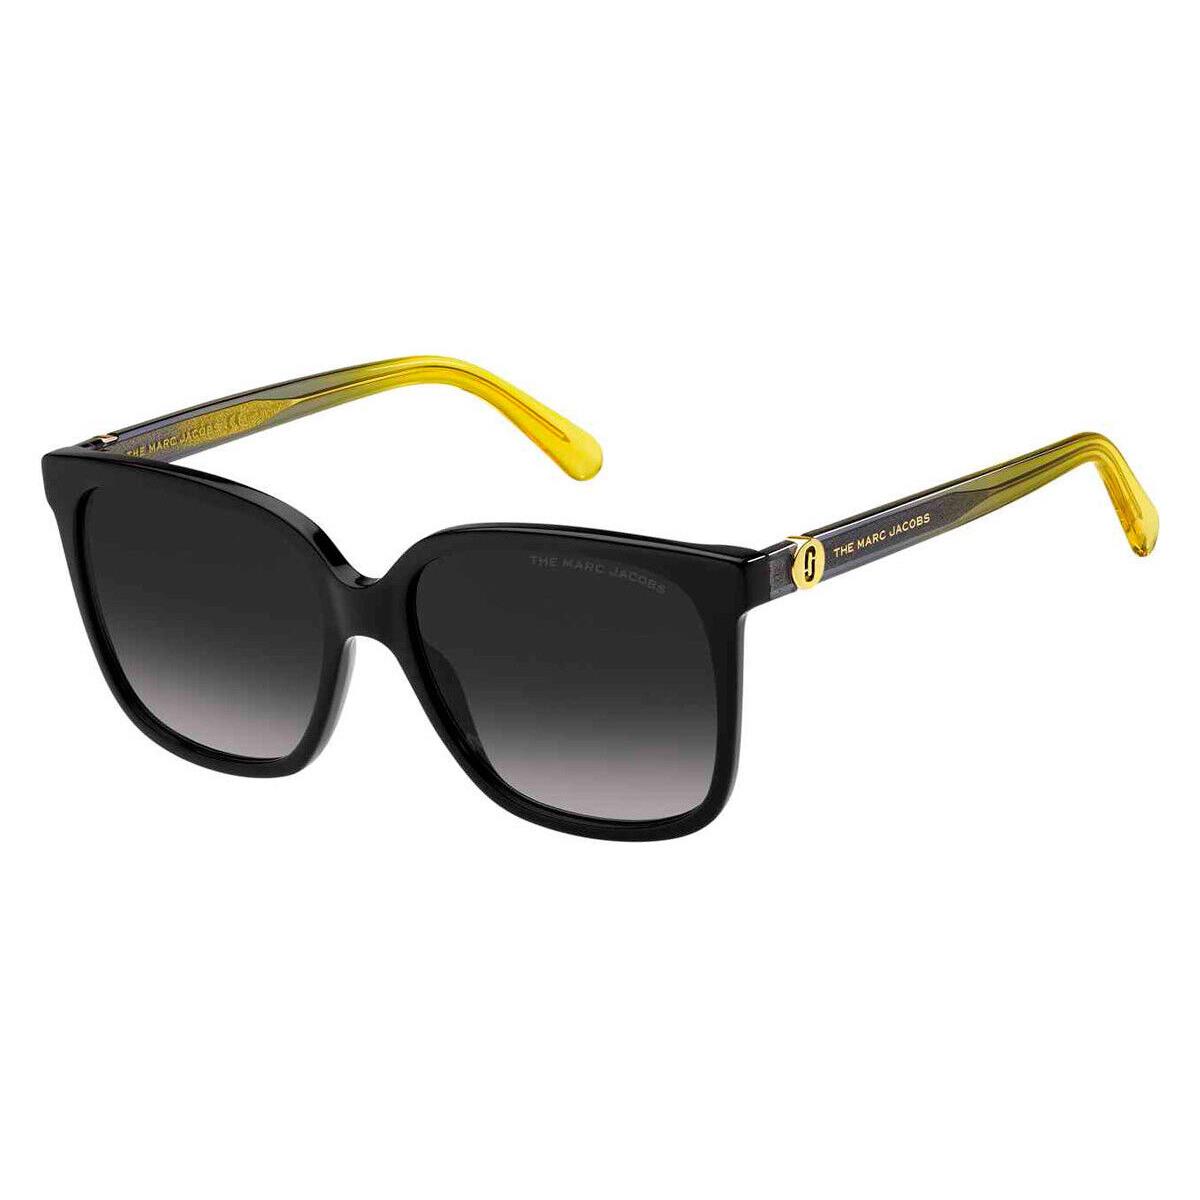 Marc Jacobs 582/S Sunglasses Black Yellow Gray Shaded 56mm